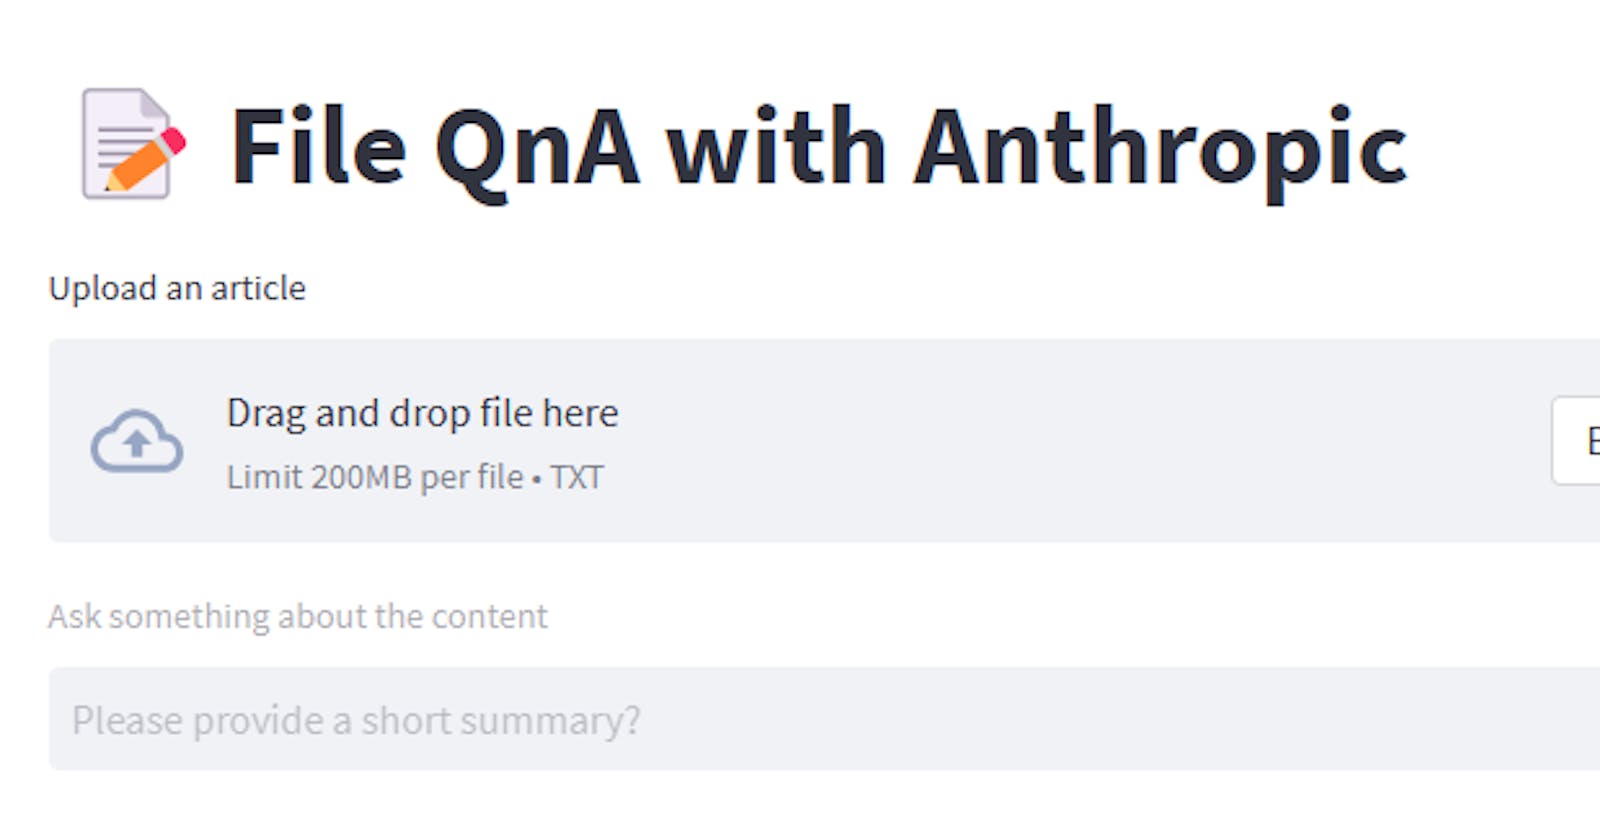 Simplifying Article Analysis with File Q&A and Anthropic API